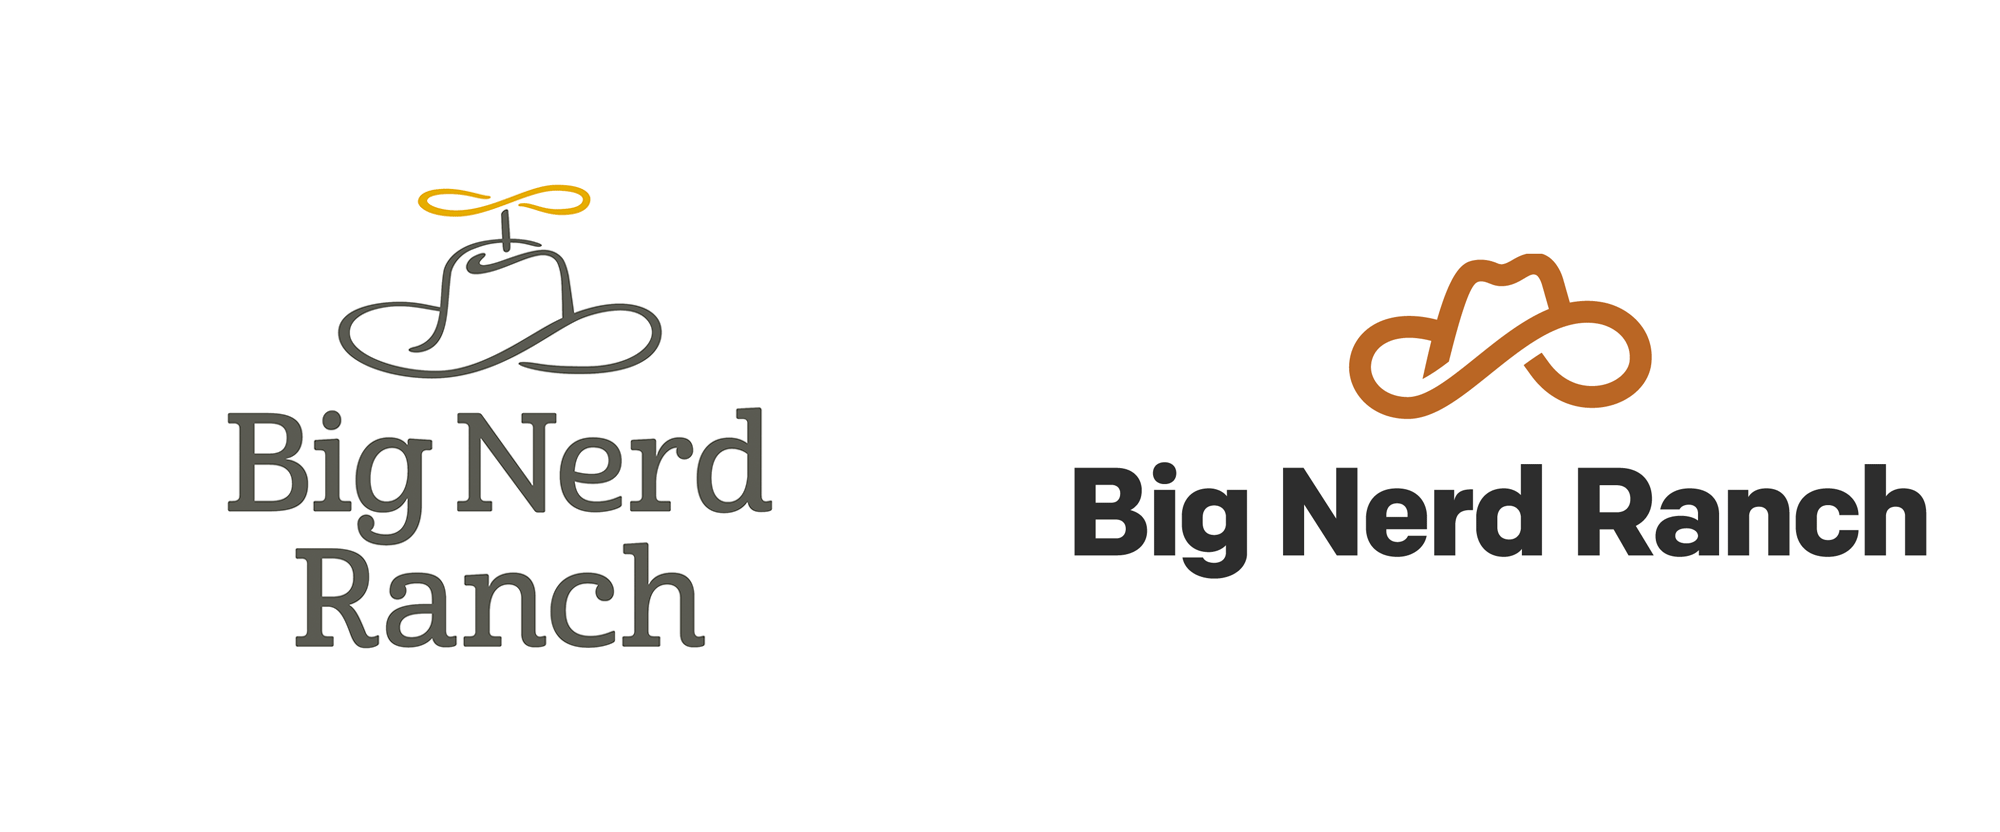 Clip Logo - Brand New: New Logo and Identity for Big Nerd Ranch by Matchstic